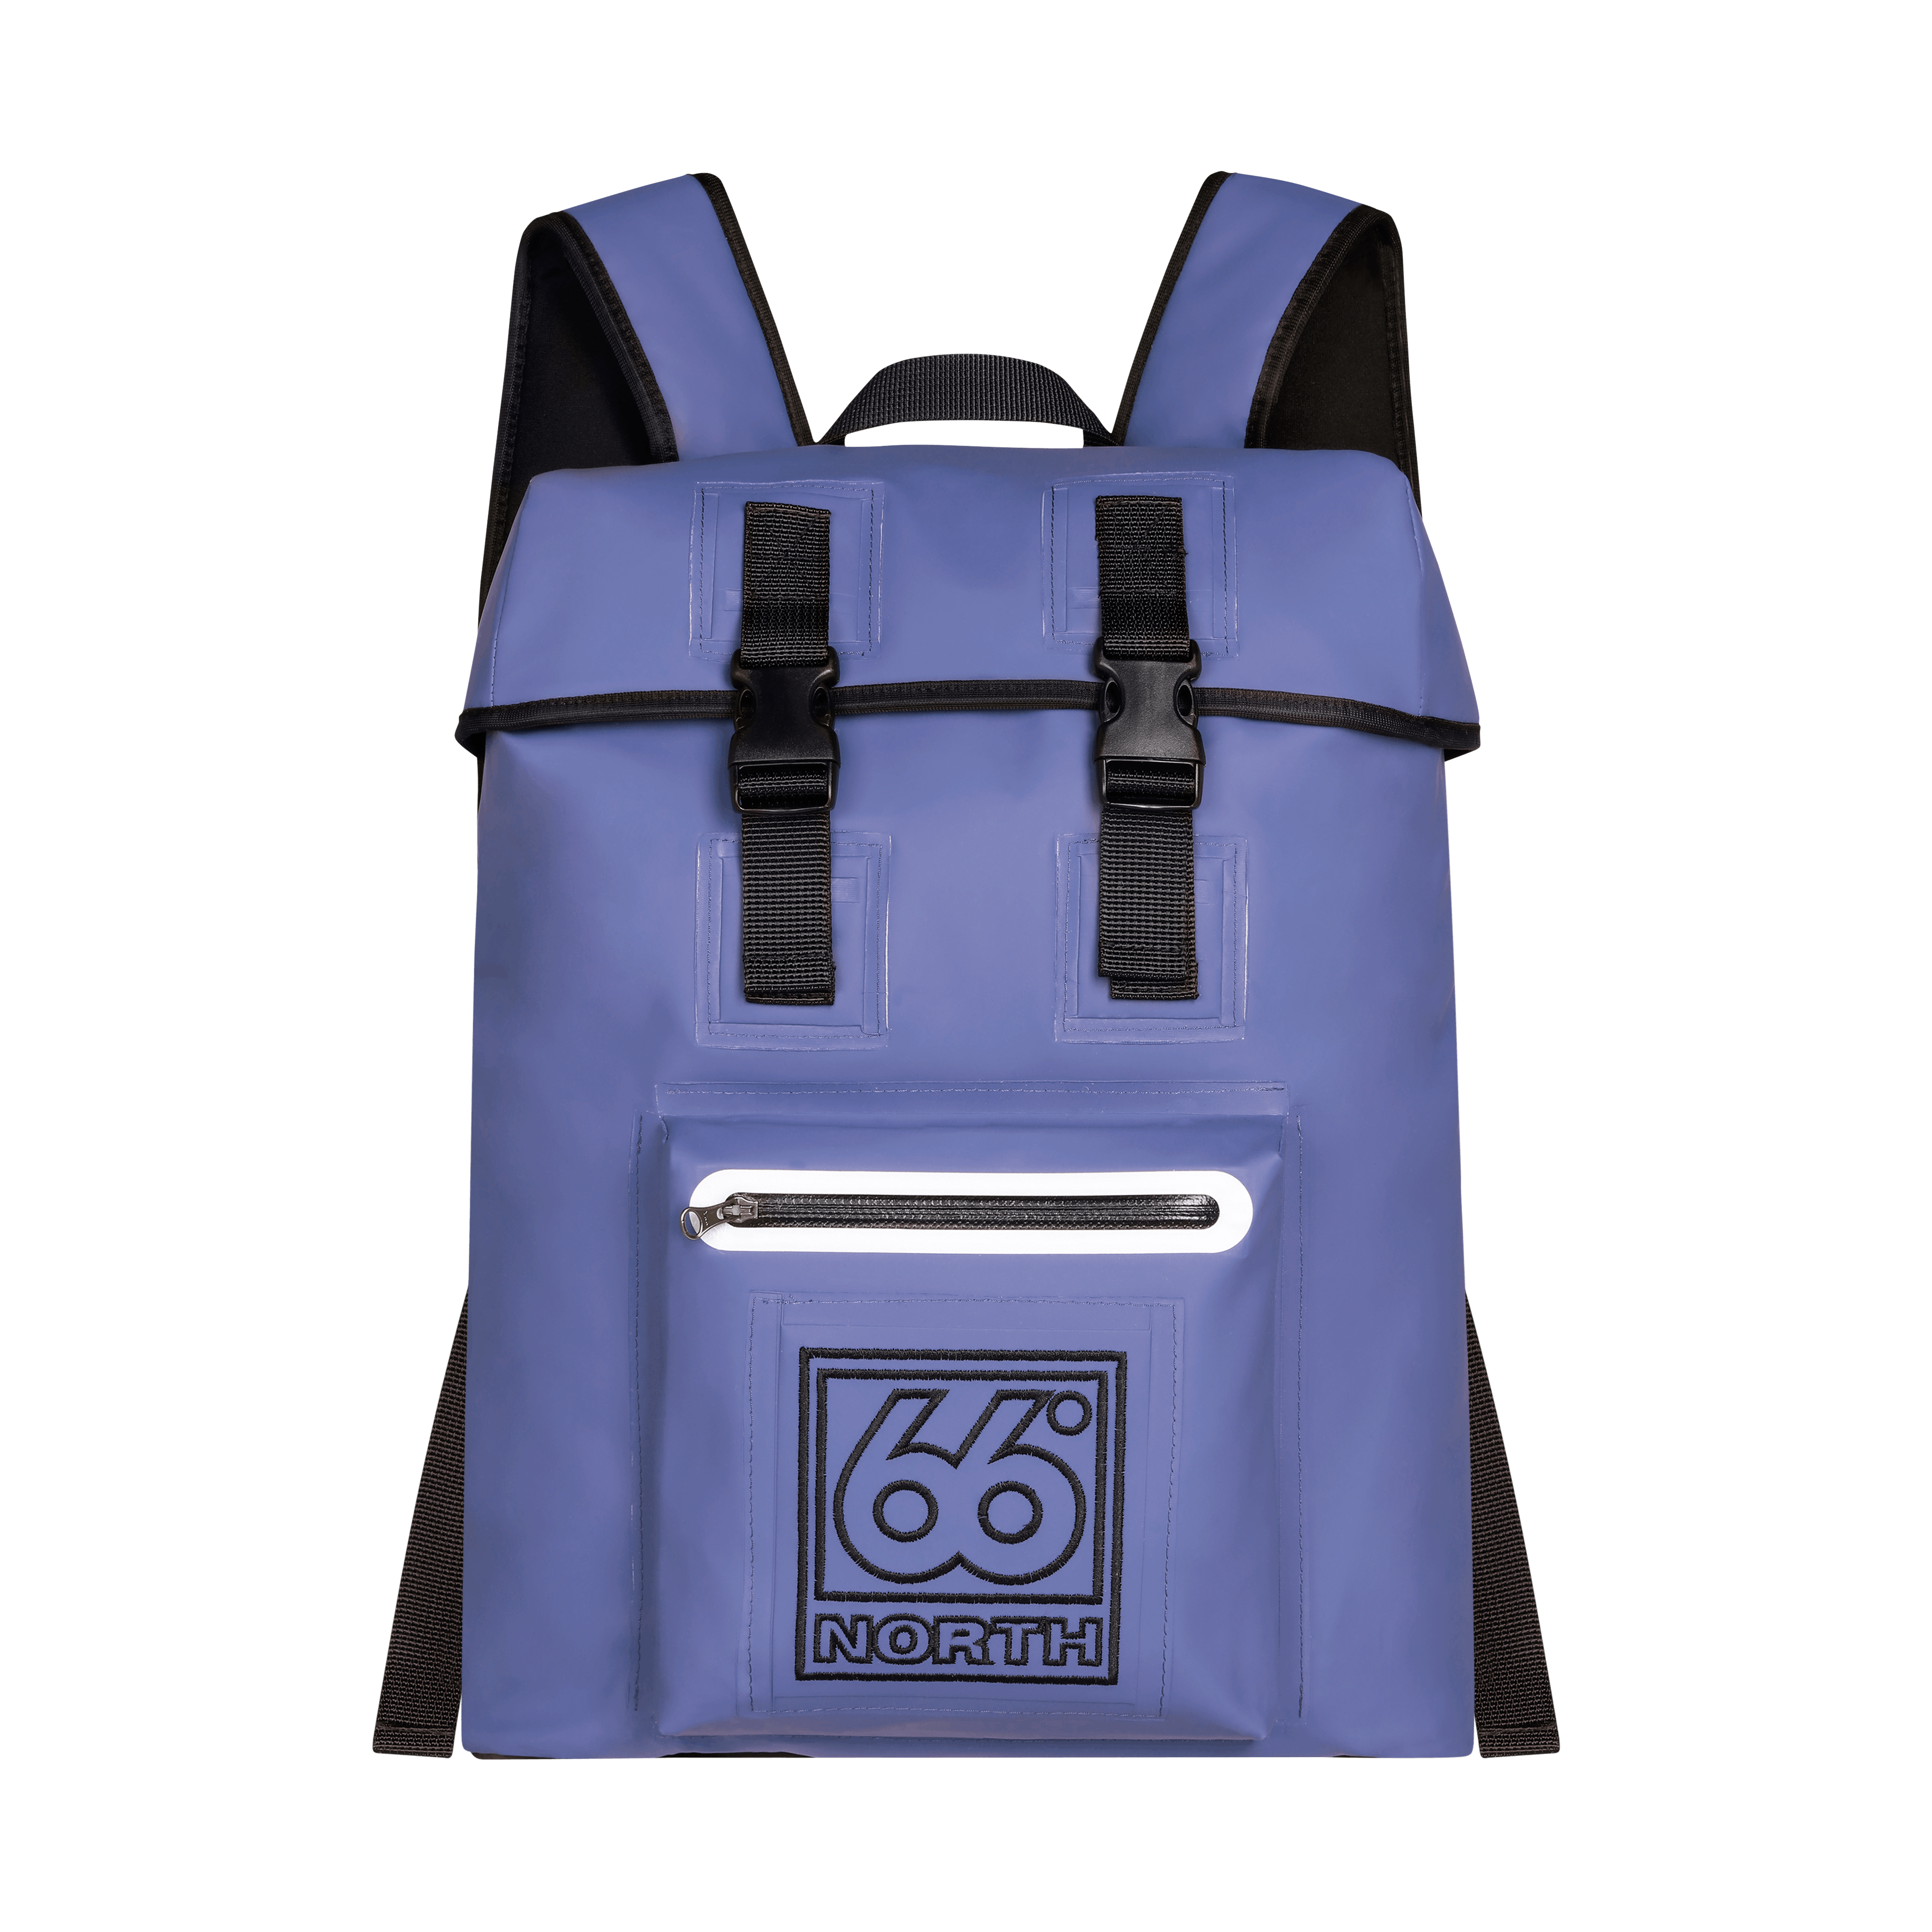 66 North Women's Backpack Accessories